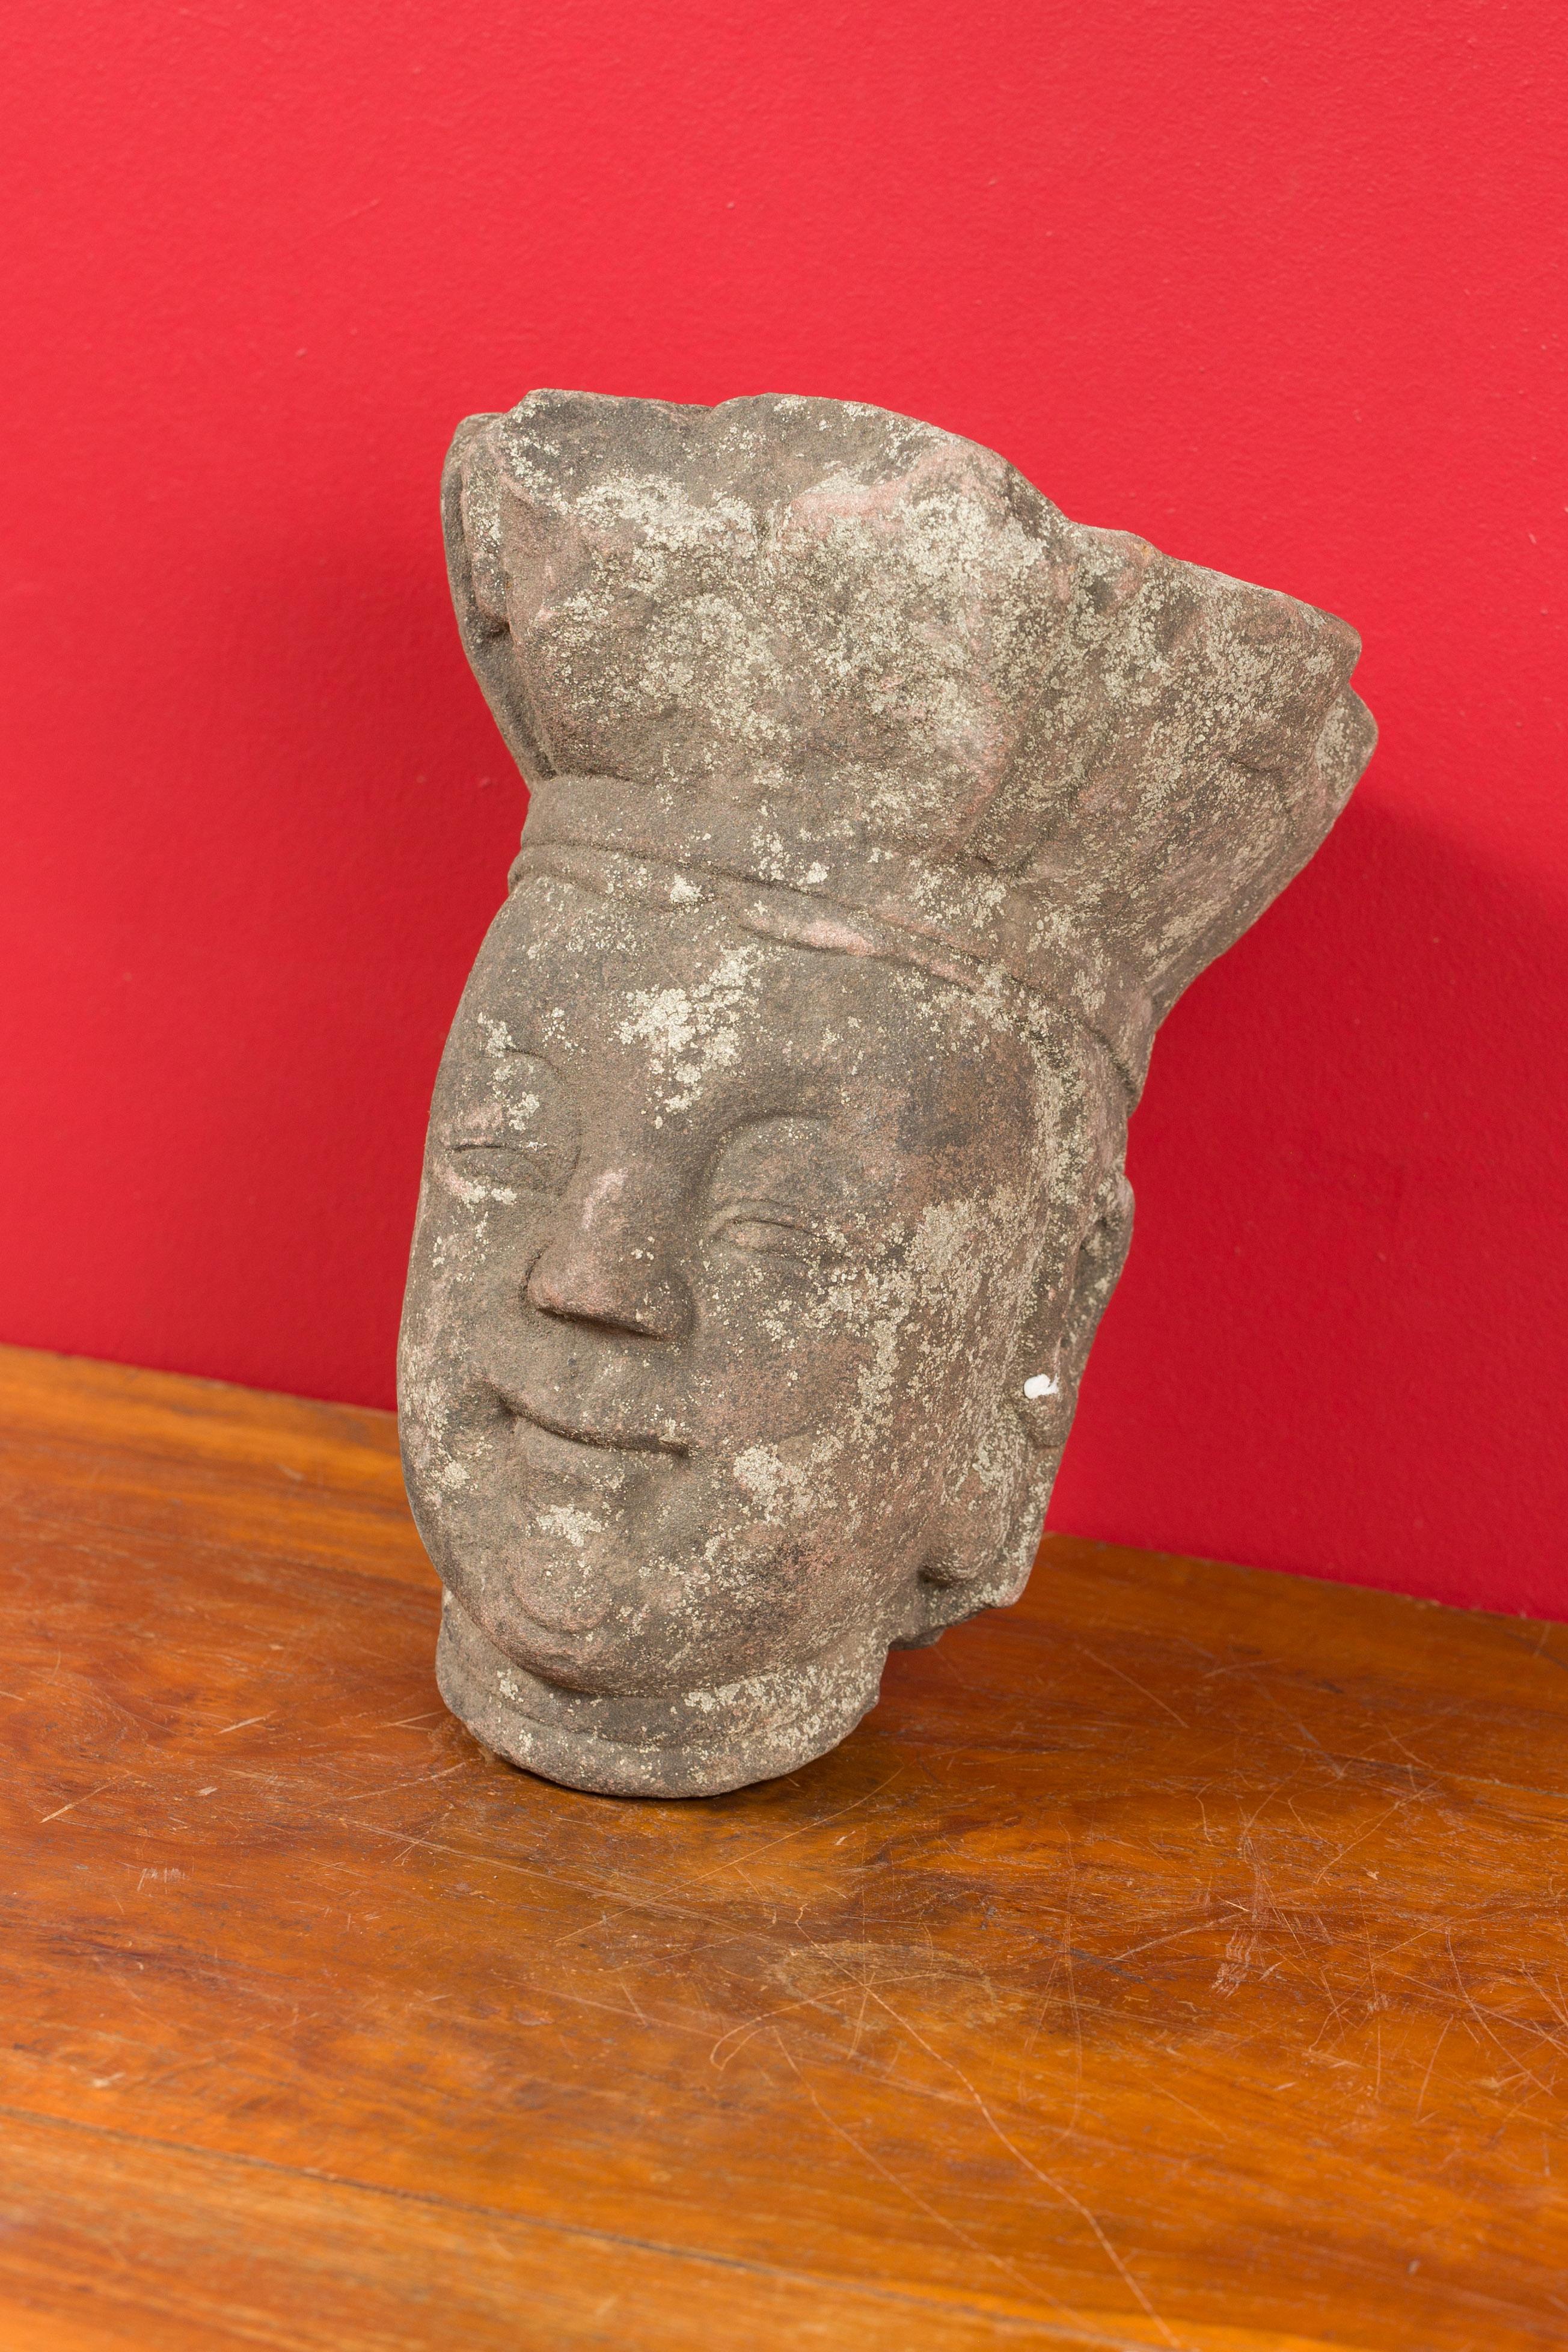 Antique Chinese Carved Stone Head Sculpture Depicting a Religious Figure 2